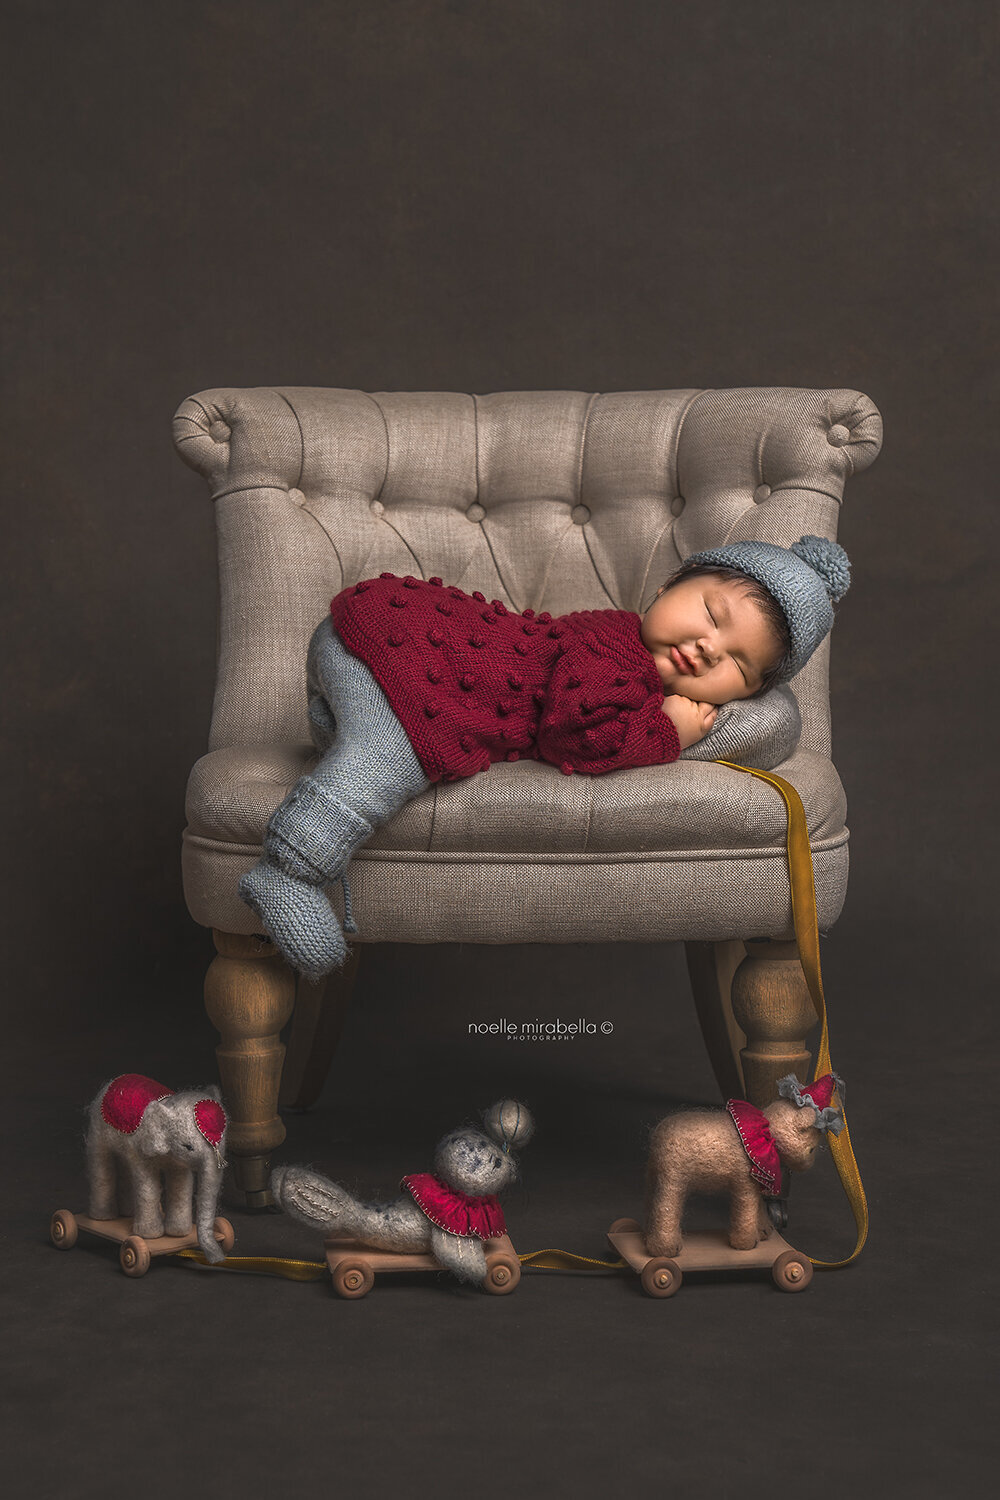 Baby sleeping on linen chair with vintage circus pull toy.